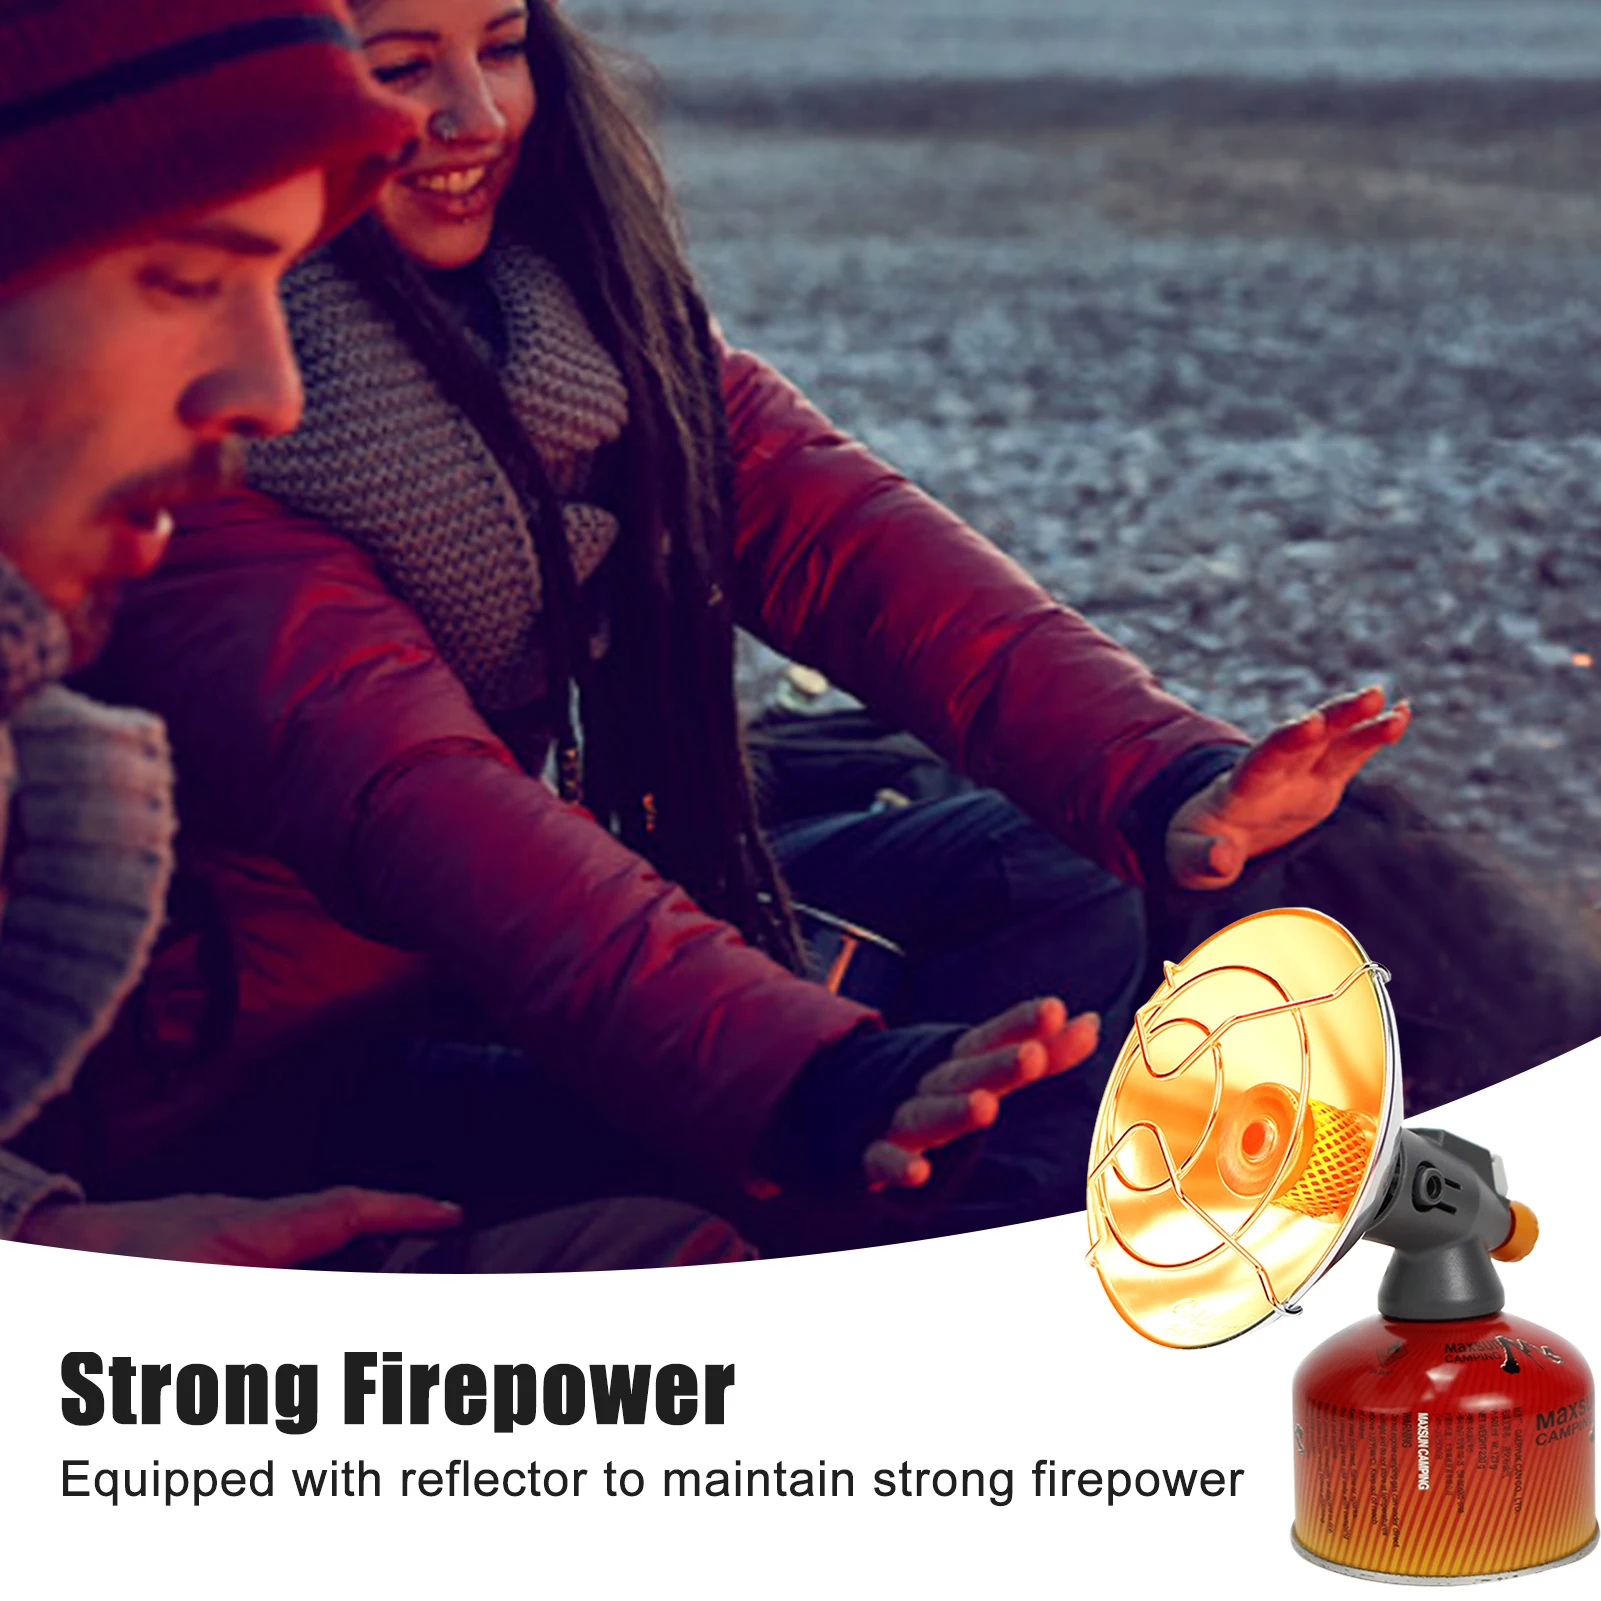 

Tent Heater Portable Gases Heater Outdoor Camping Bu-tane Gases Heater Stove Mini Fishing Hunting Tent Stove Travel Hiking